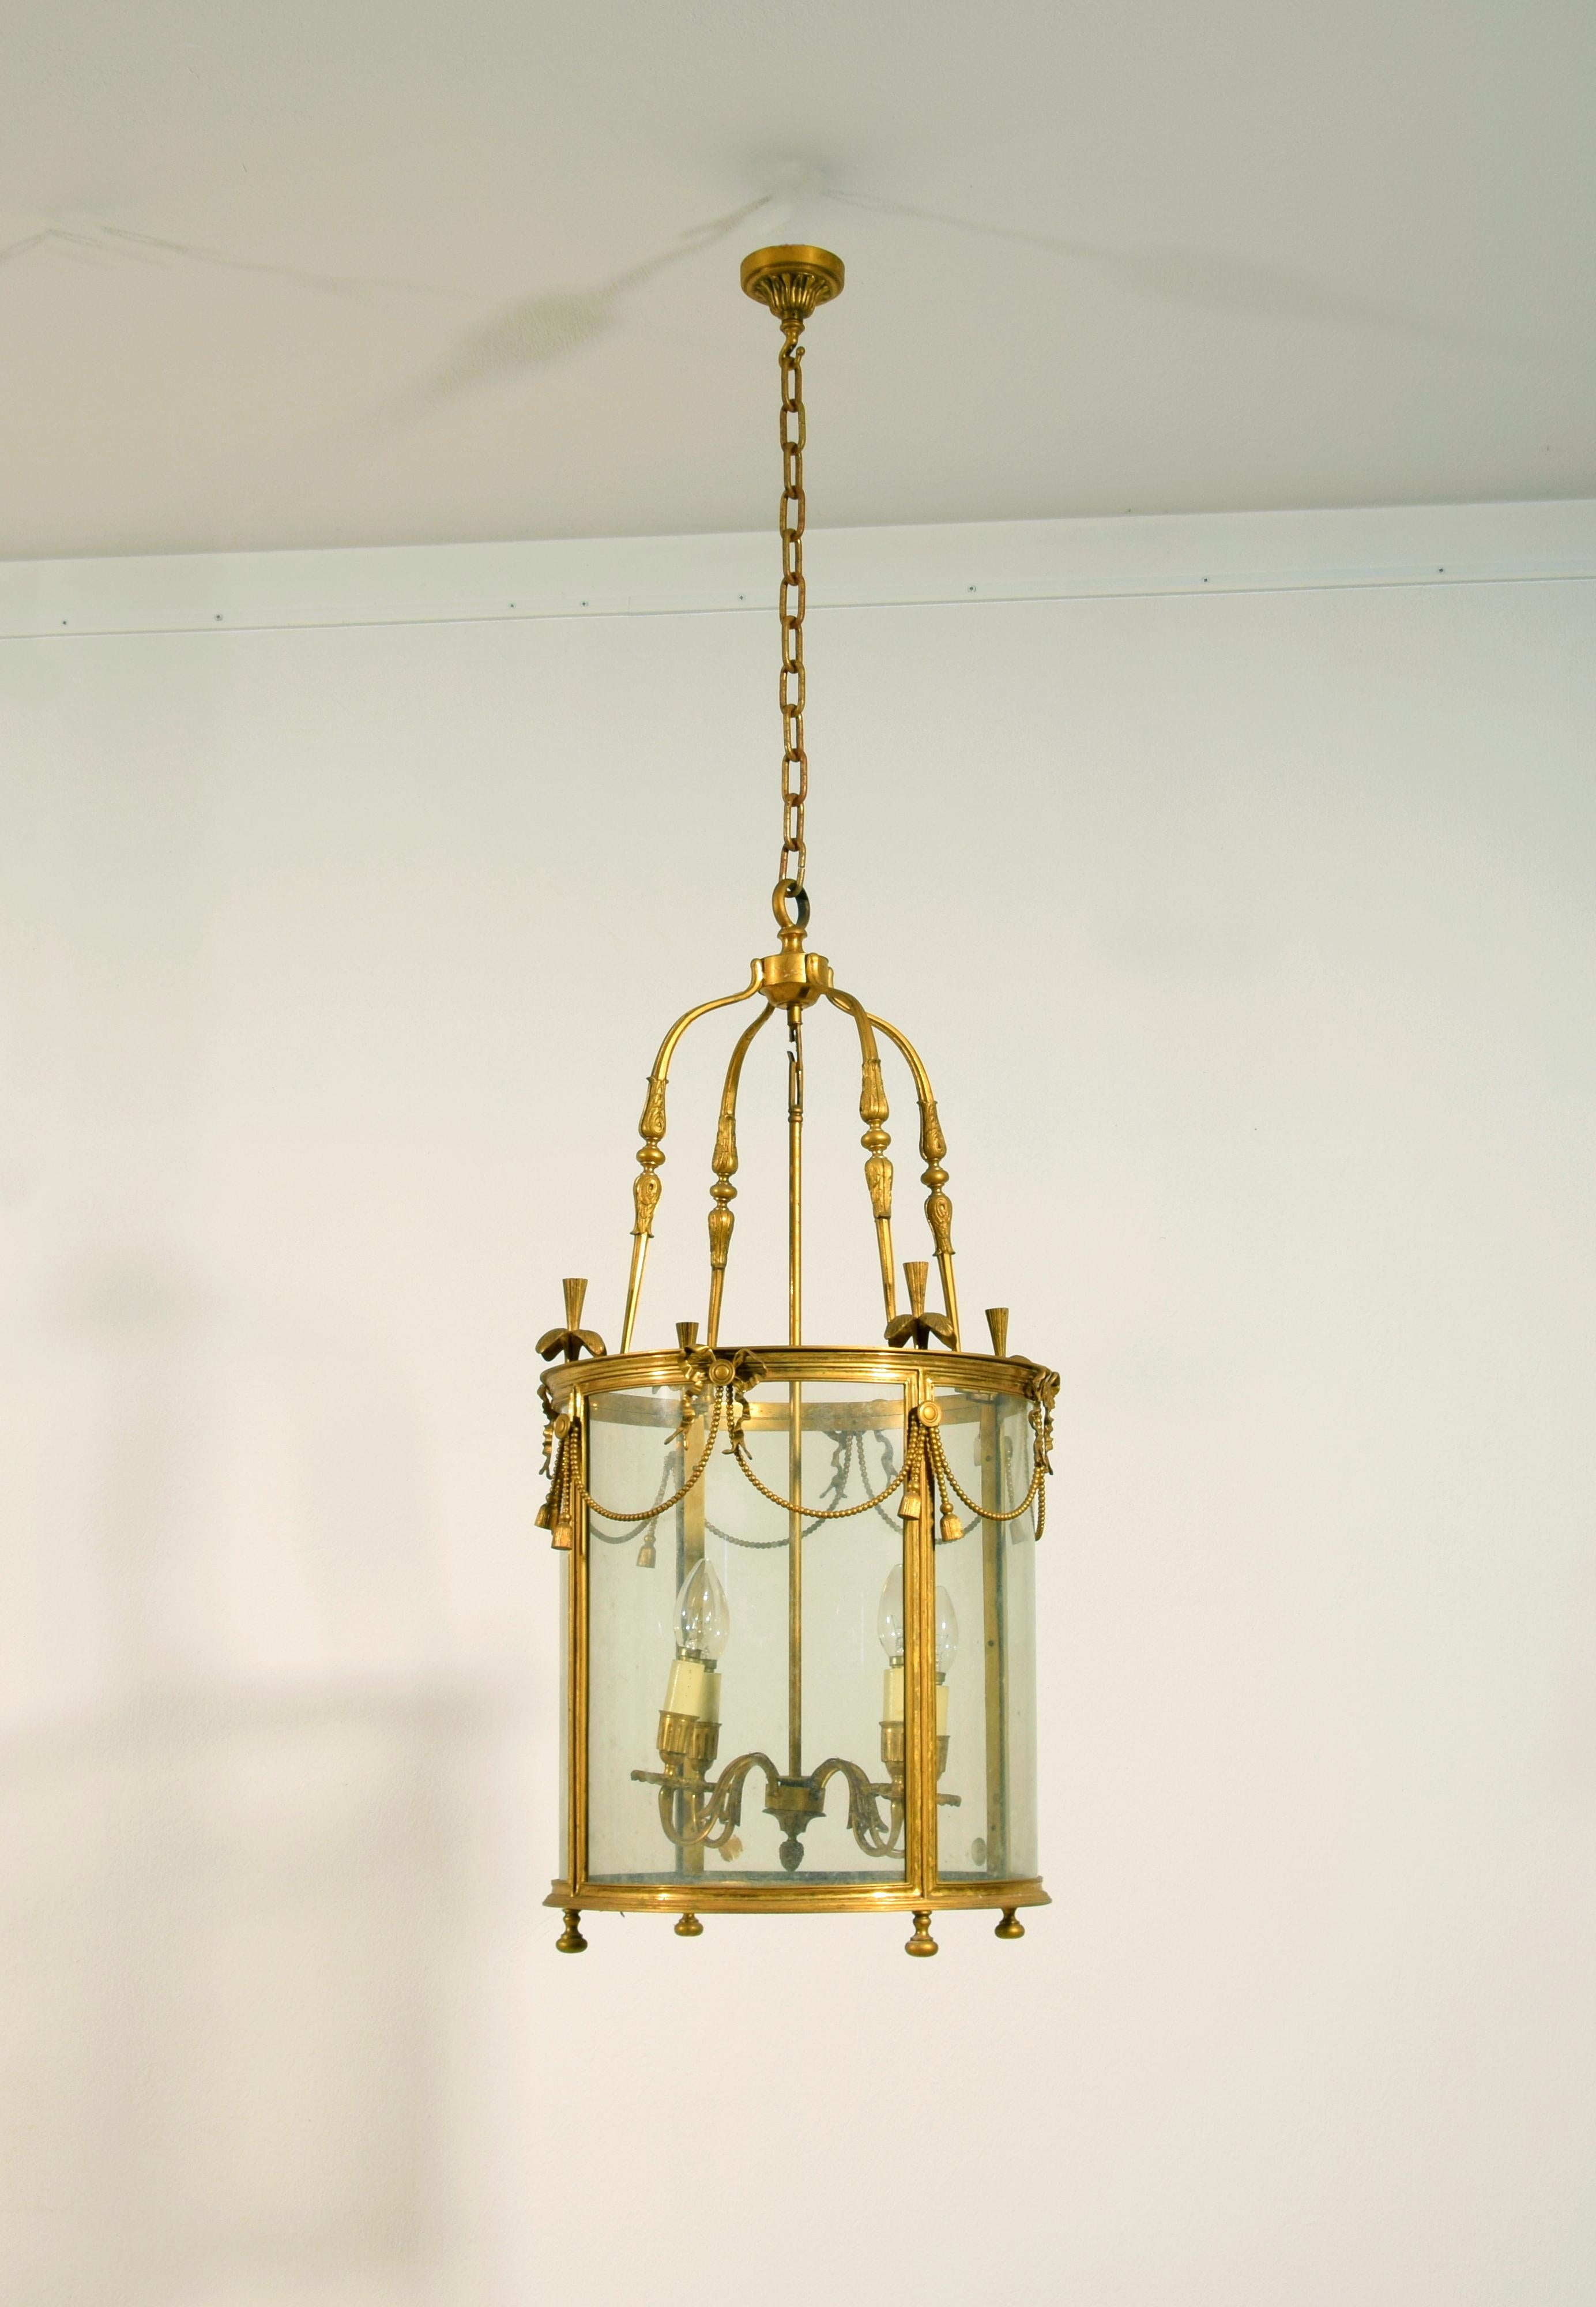 20th century, French Gilt Bronze Four Lights Lantern Chandelier

This four-light gilded bronze lantern was made in France in the early 20th century. The central element is circular with glass doors supported by a gilded bronze structure decorated